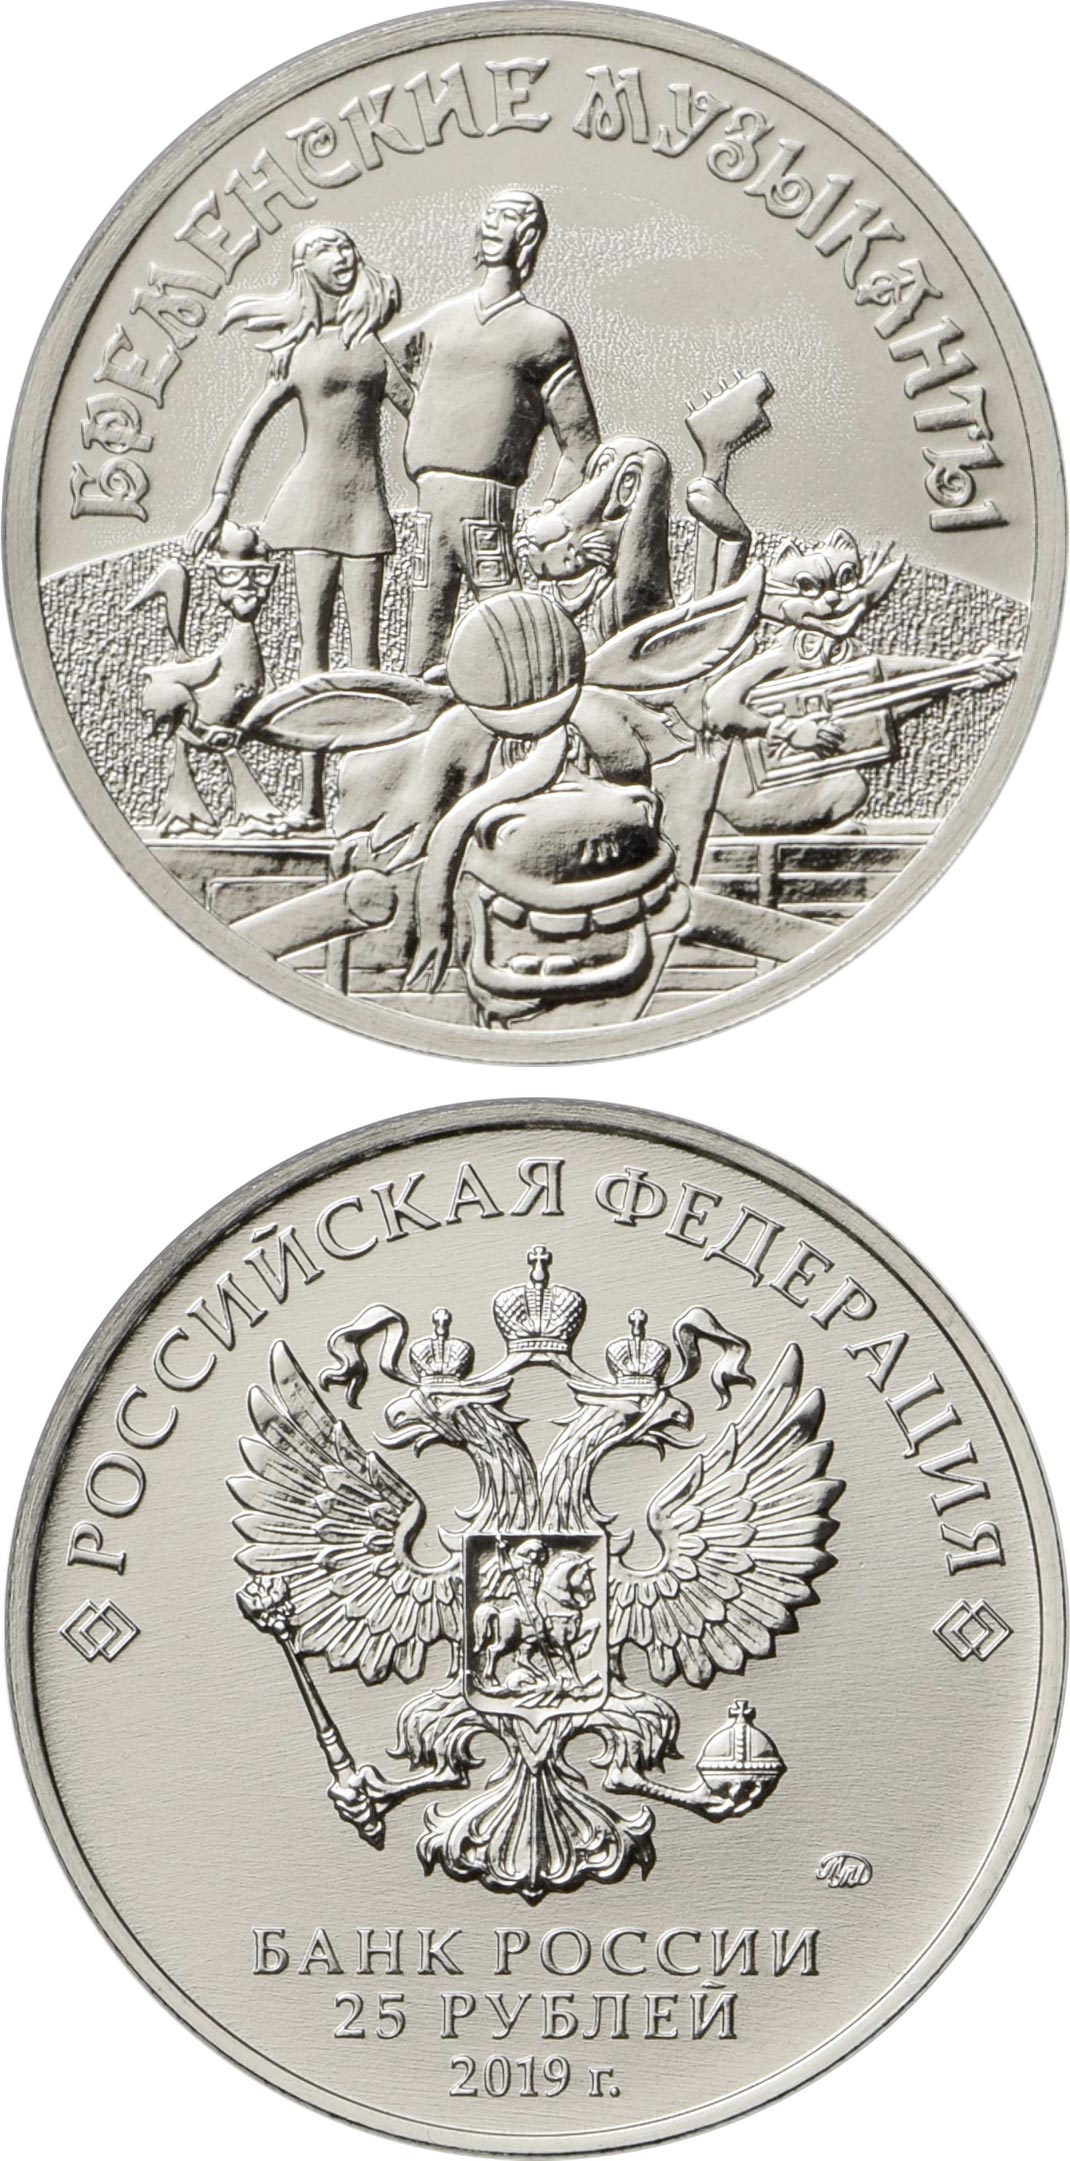 Image of 25 rubles coin - The Bremen Town Musicians  | Russia 2019.  The Copper–Nickel (CuNi) coin is of UNC quality.